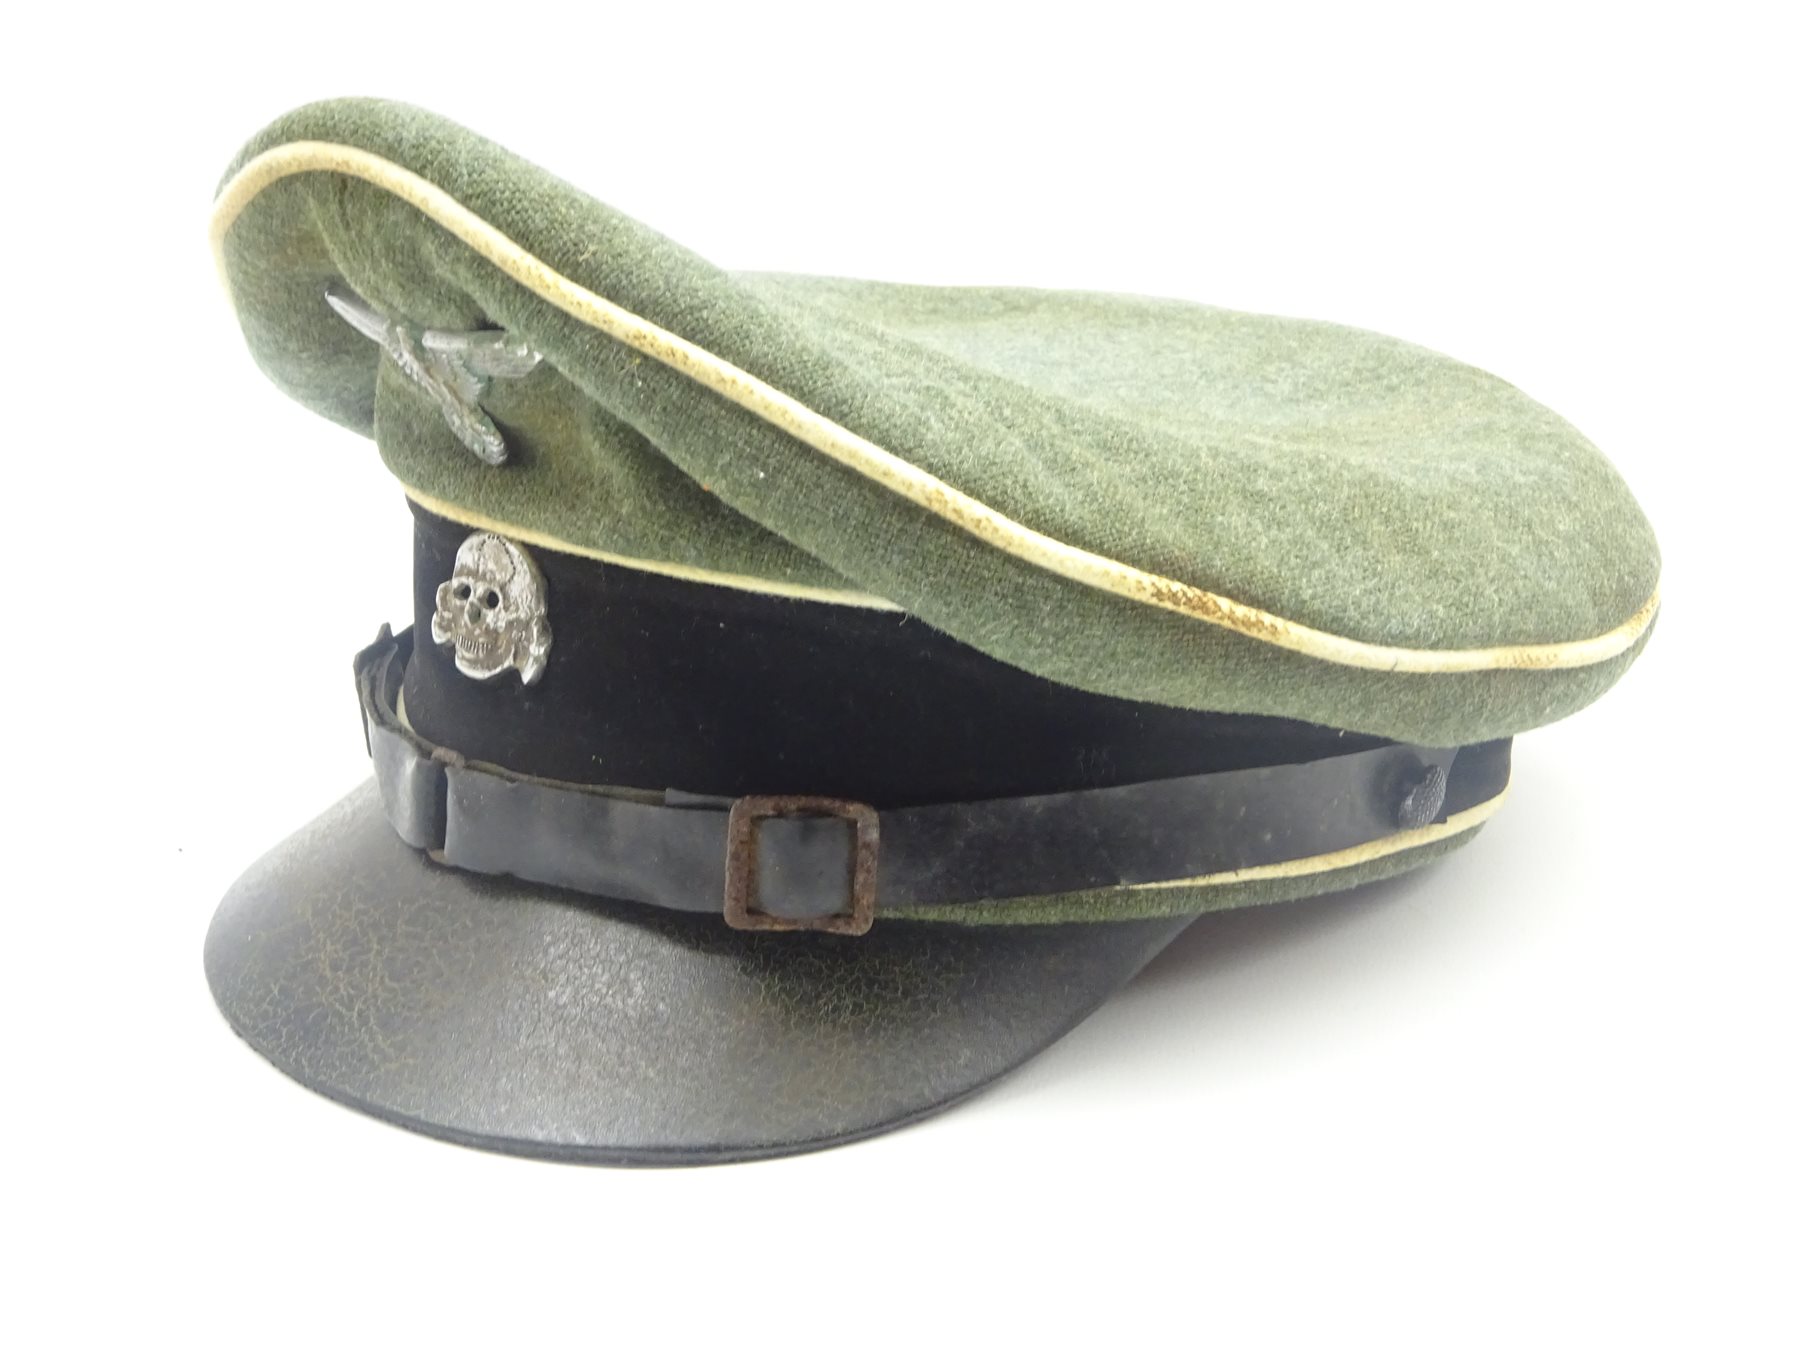 WW2 German Waffen-SS officer's peaked cap with metal eagle and totenkopf skull insignia - The ...